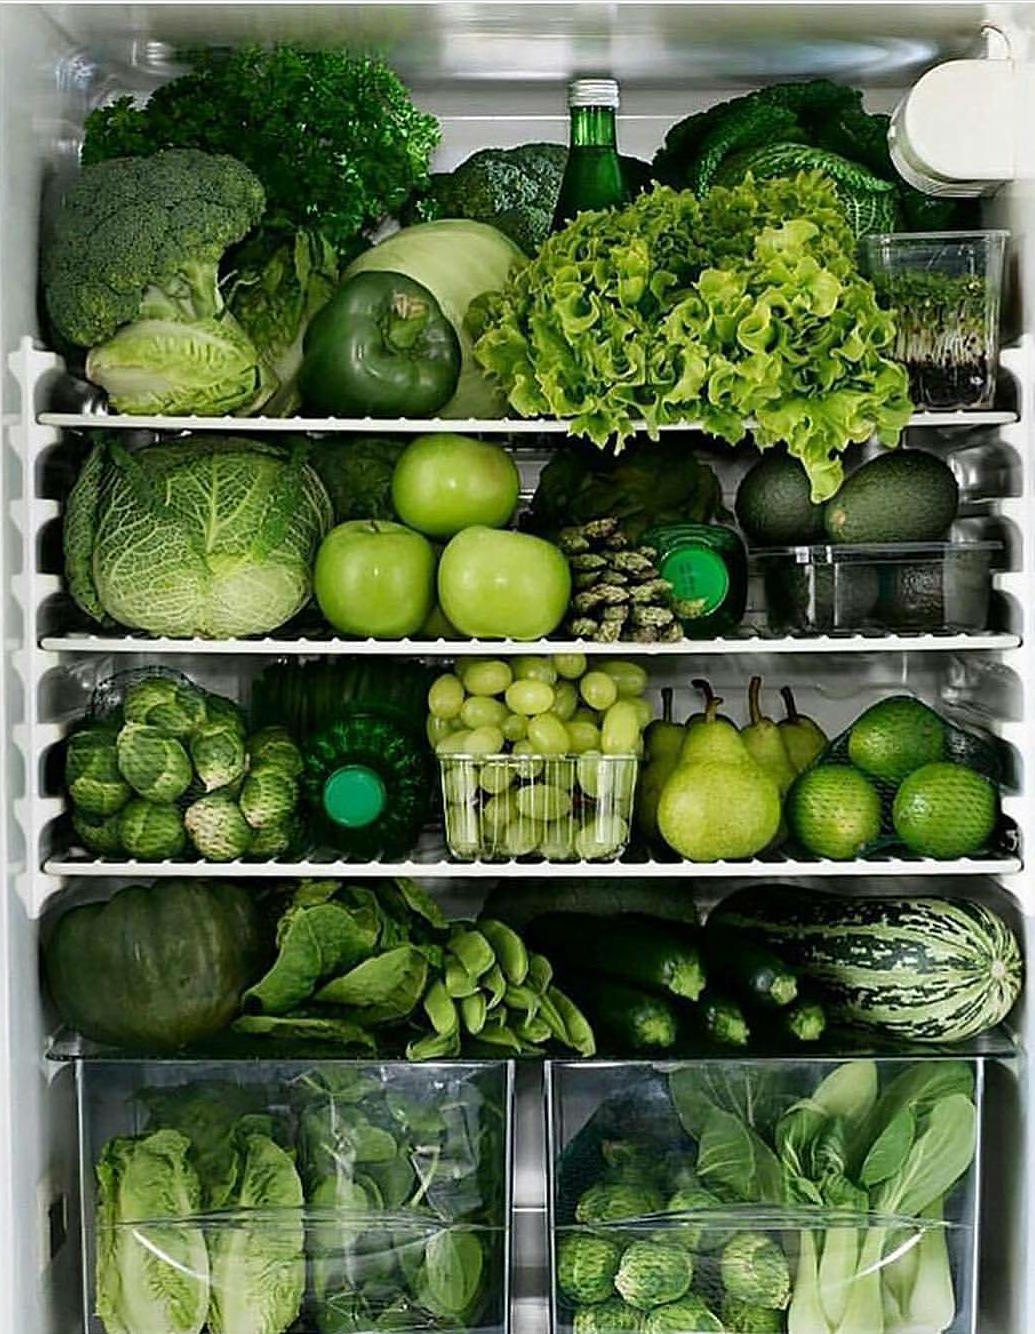 Green. Perfect. - Green, Vegetables, Refrigerator, Ideally, Perfectionism